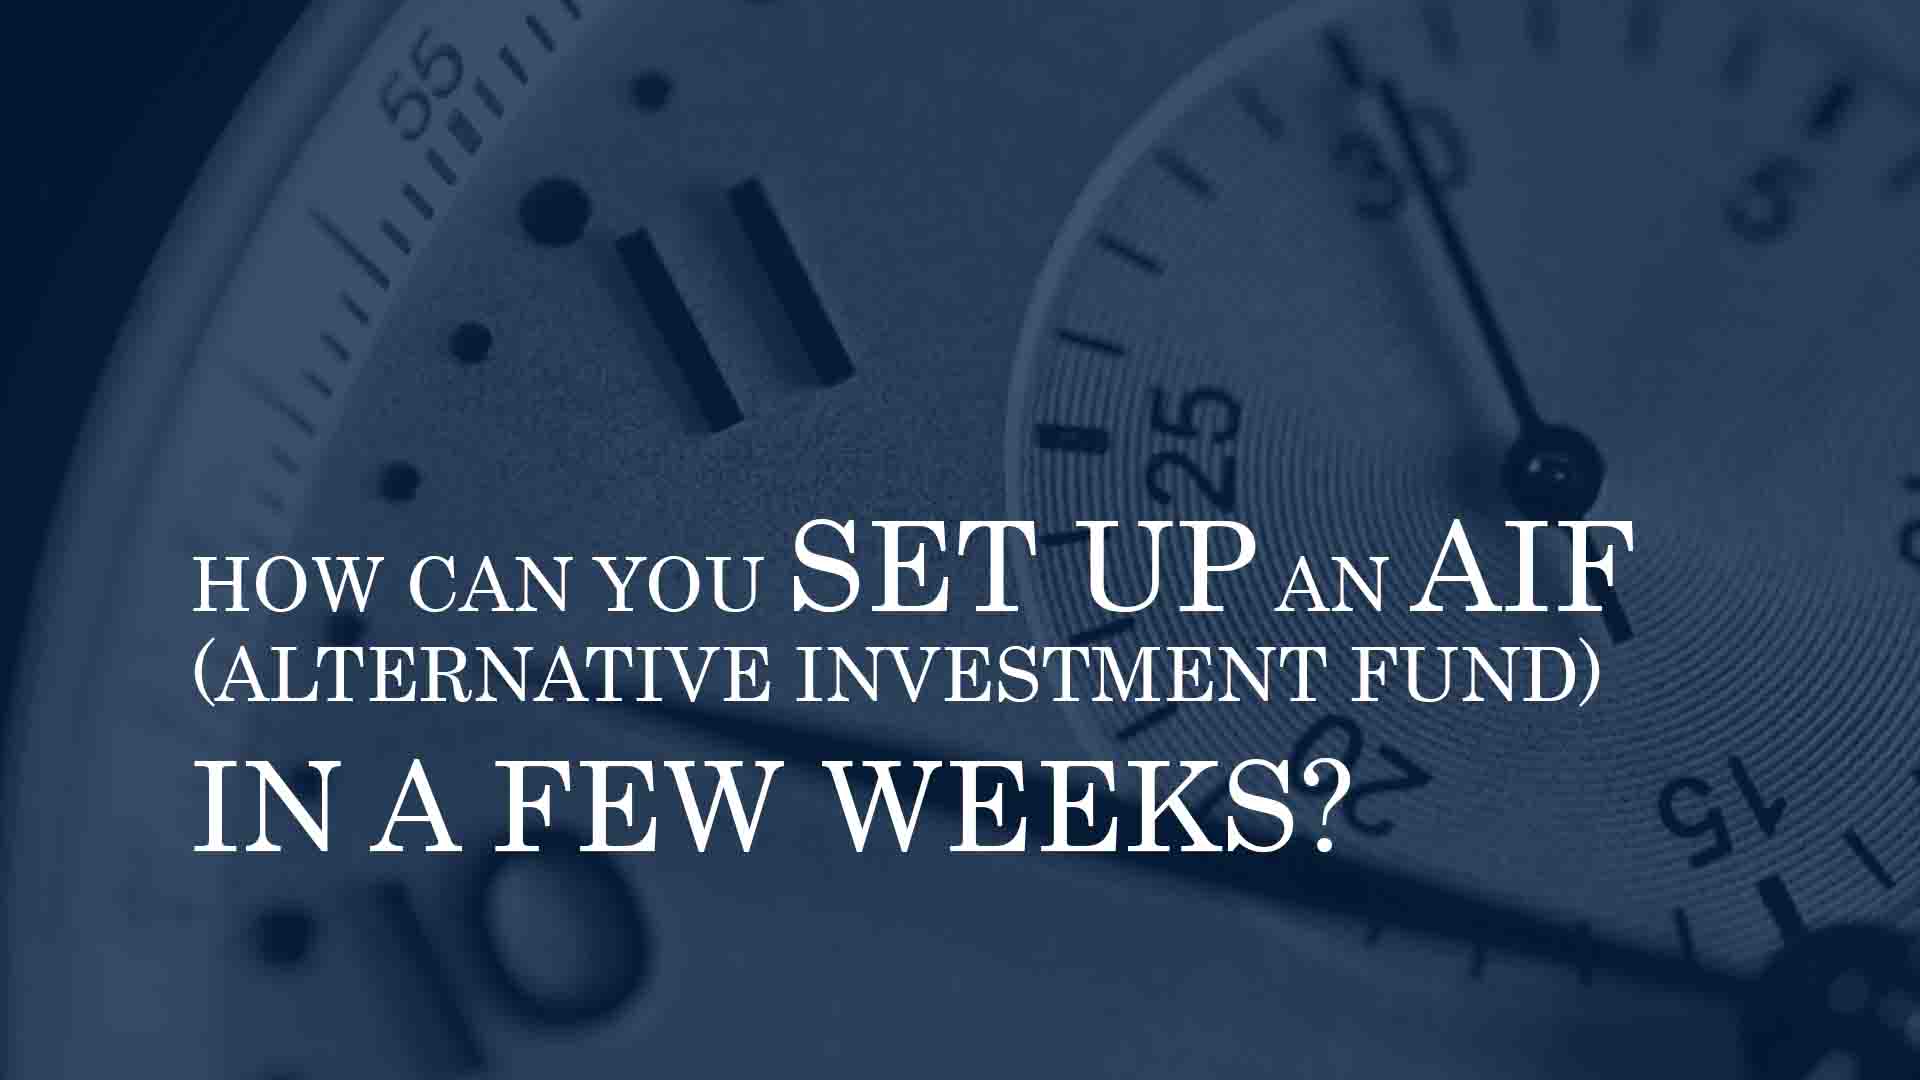 HOW CAN YOU SET UP AN ALTERNATIVE INVESTMENT FUND IN A FEW WEEKS?